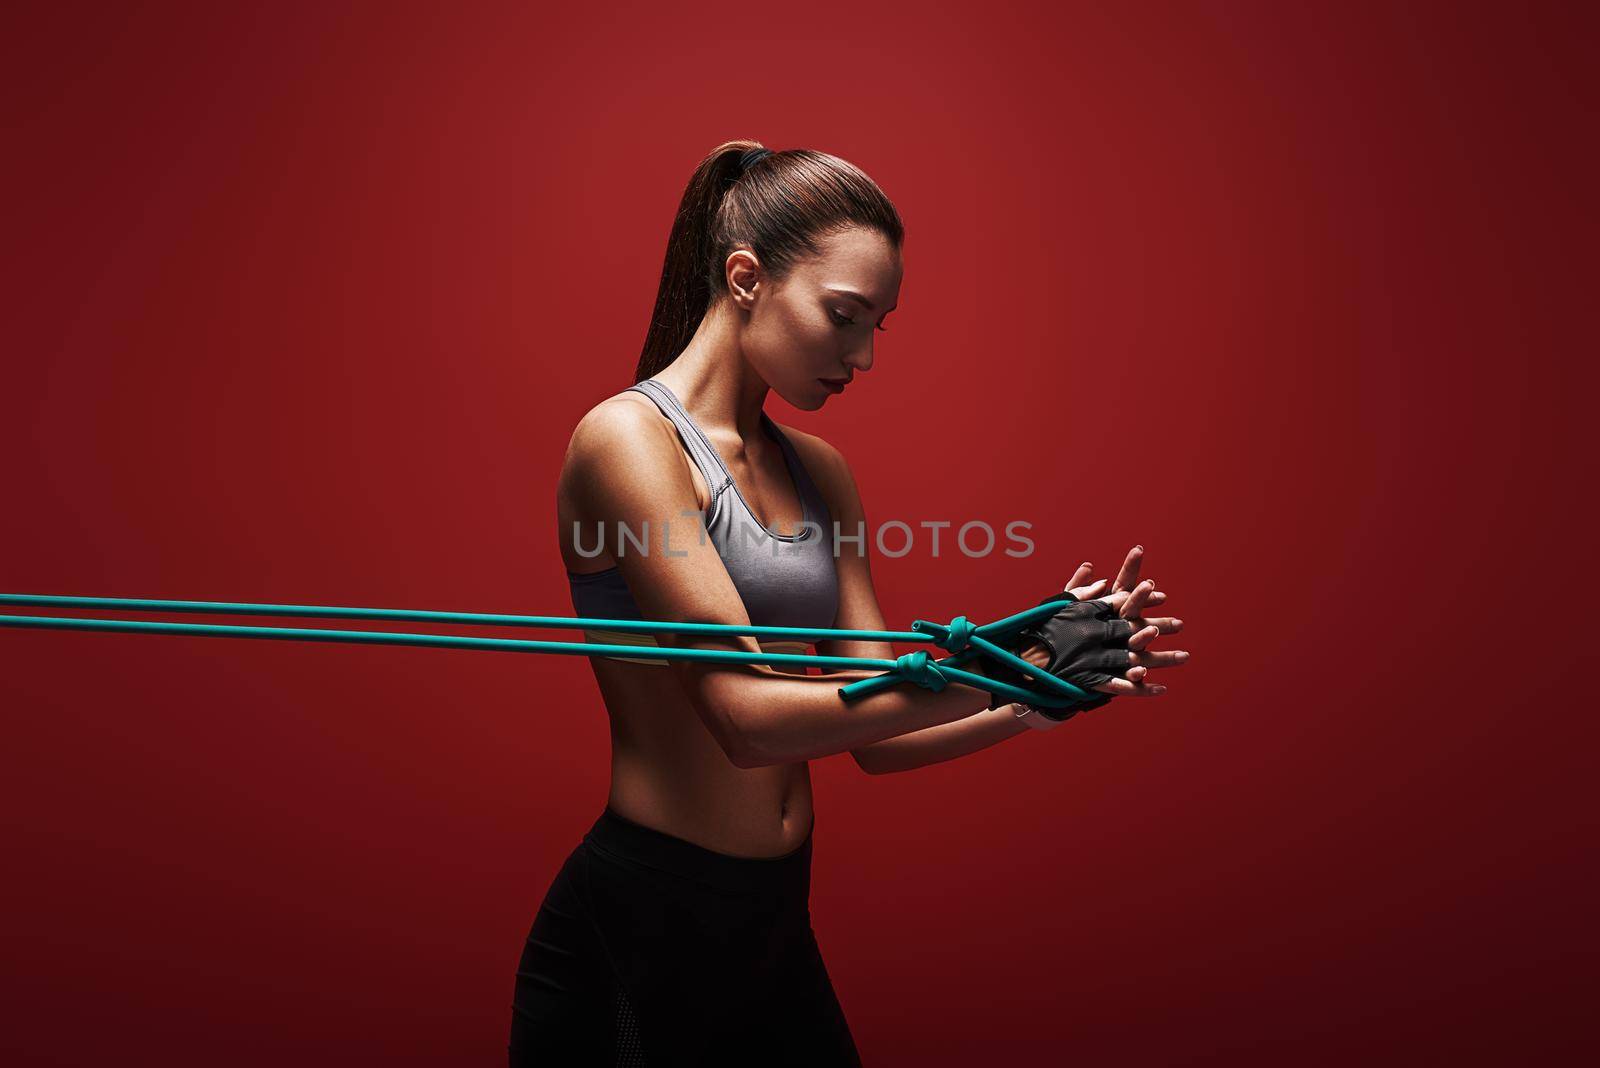 Dedication motivation success. Sportswoman performs exercises with resistance band over red background by friendsstock